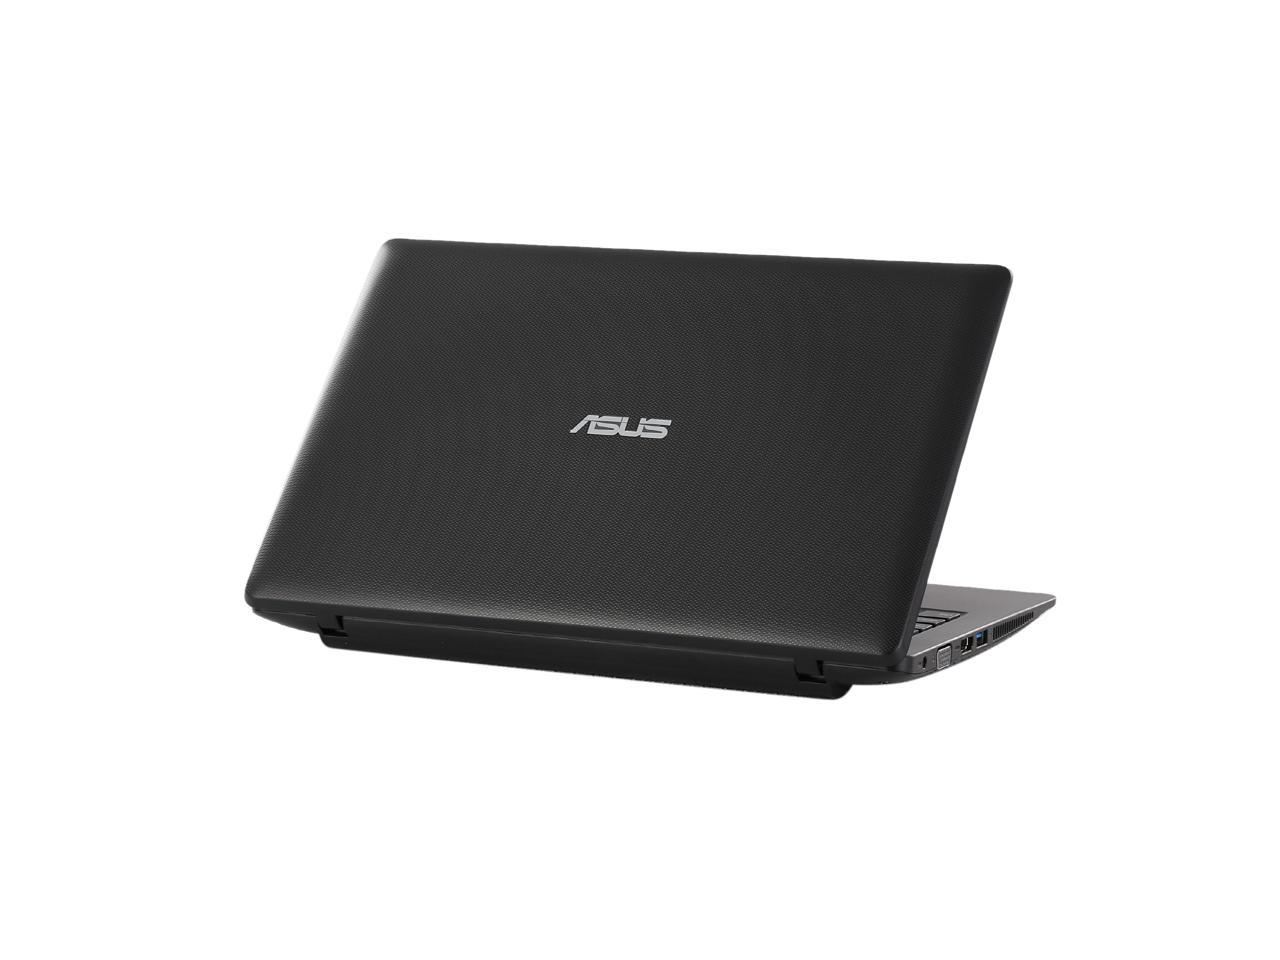 Asus A43S Drivers / Download Asus A43s Driver Free Driver ...